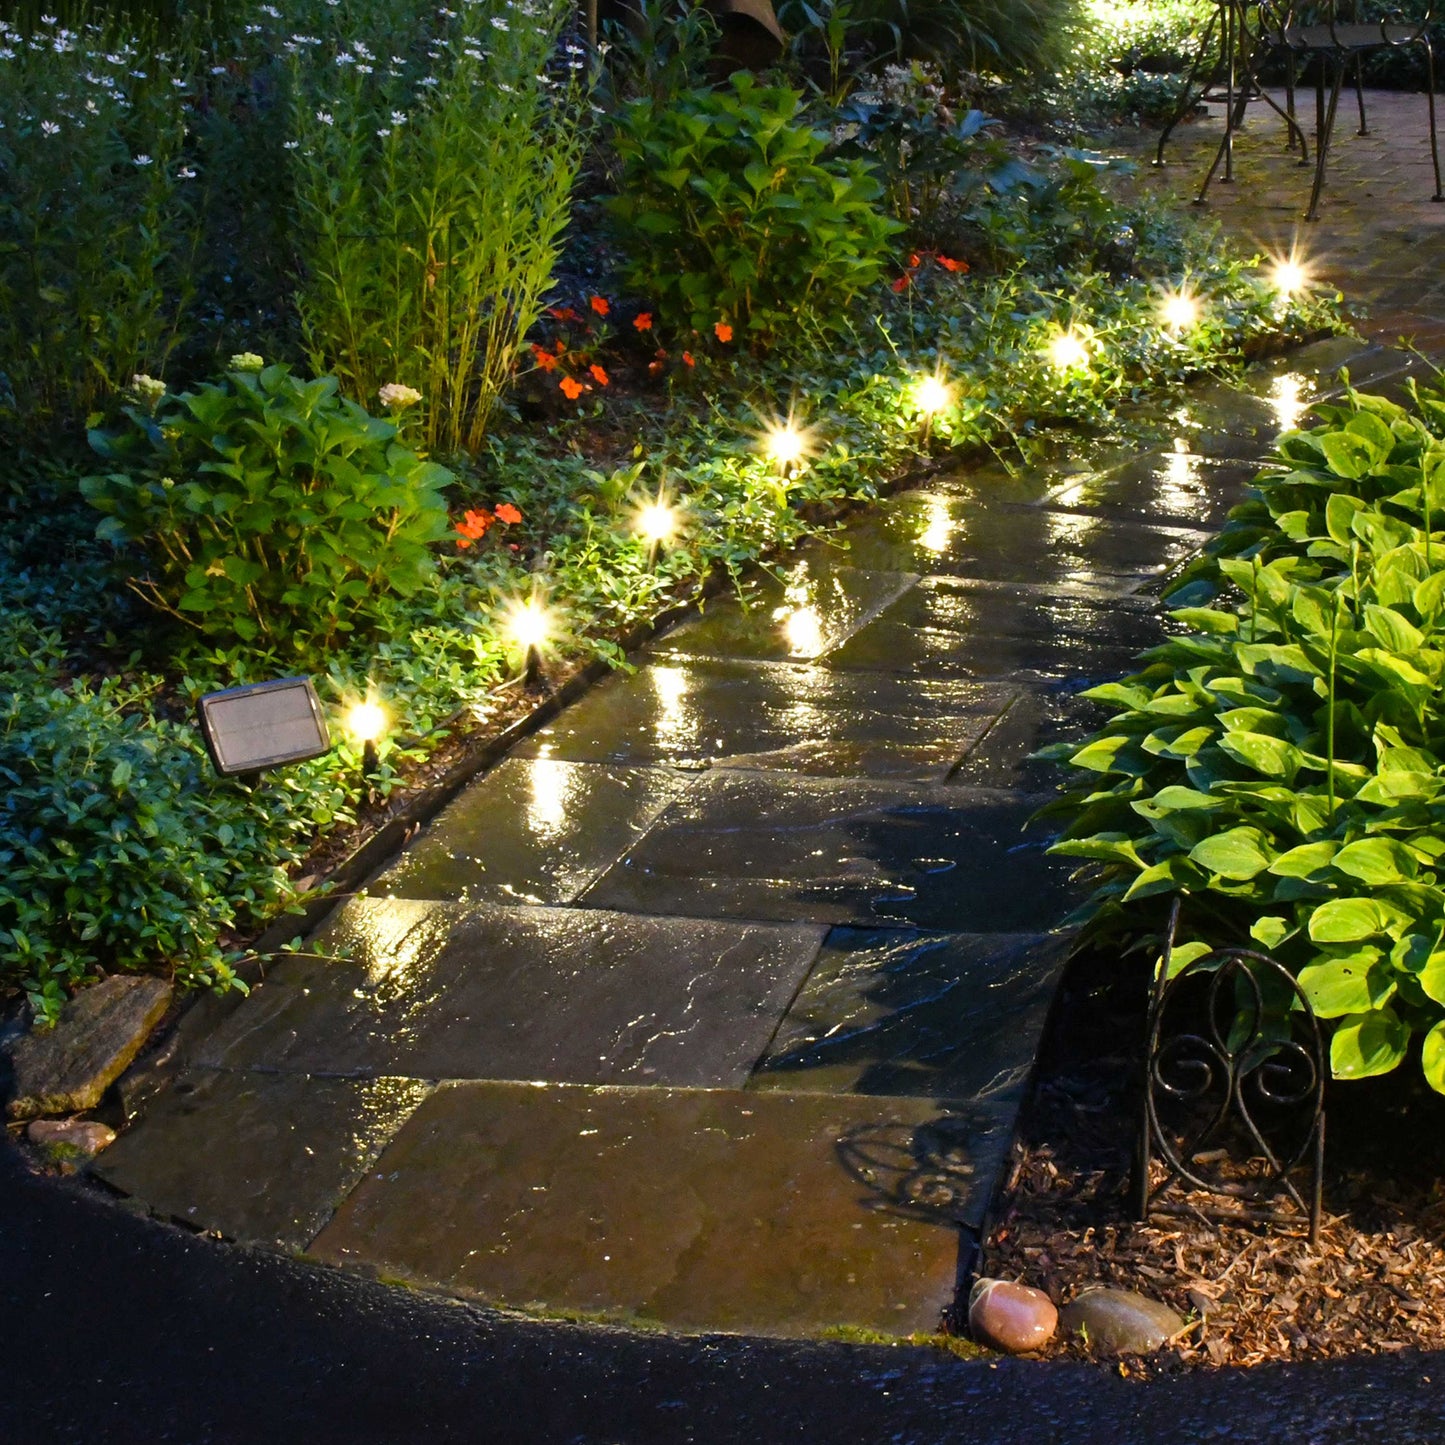 Solar Powered Pathway Lights with 8 White Globe Bulbs